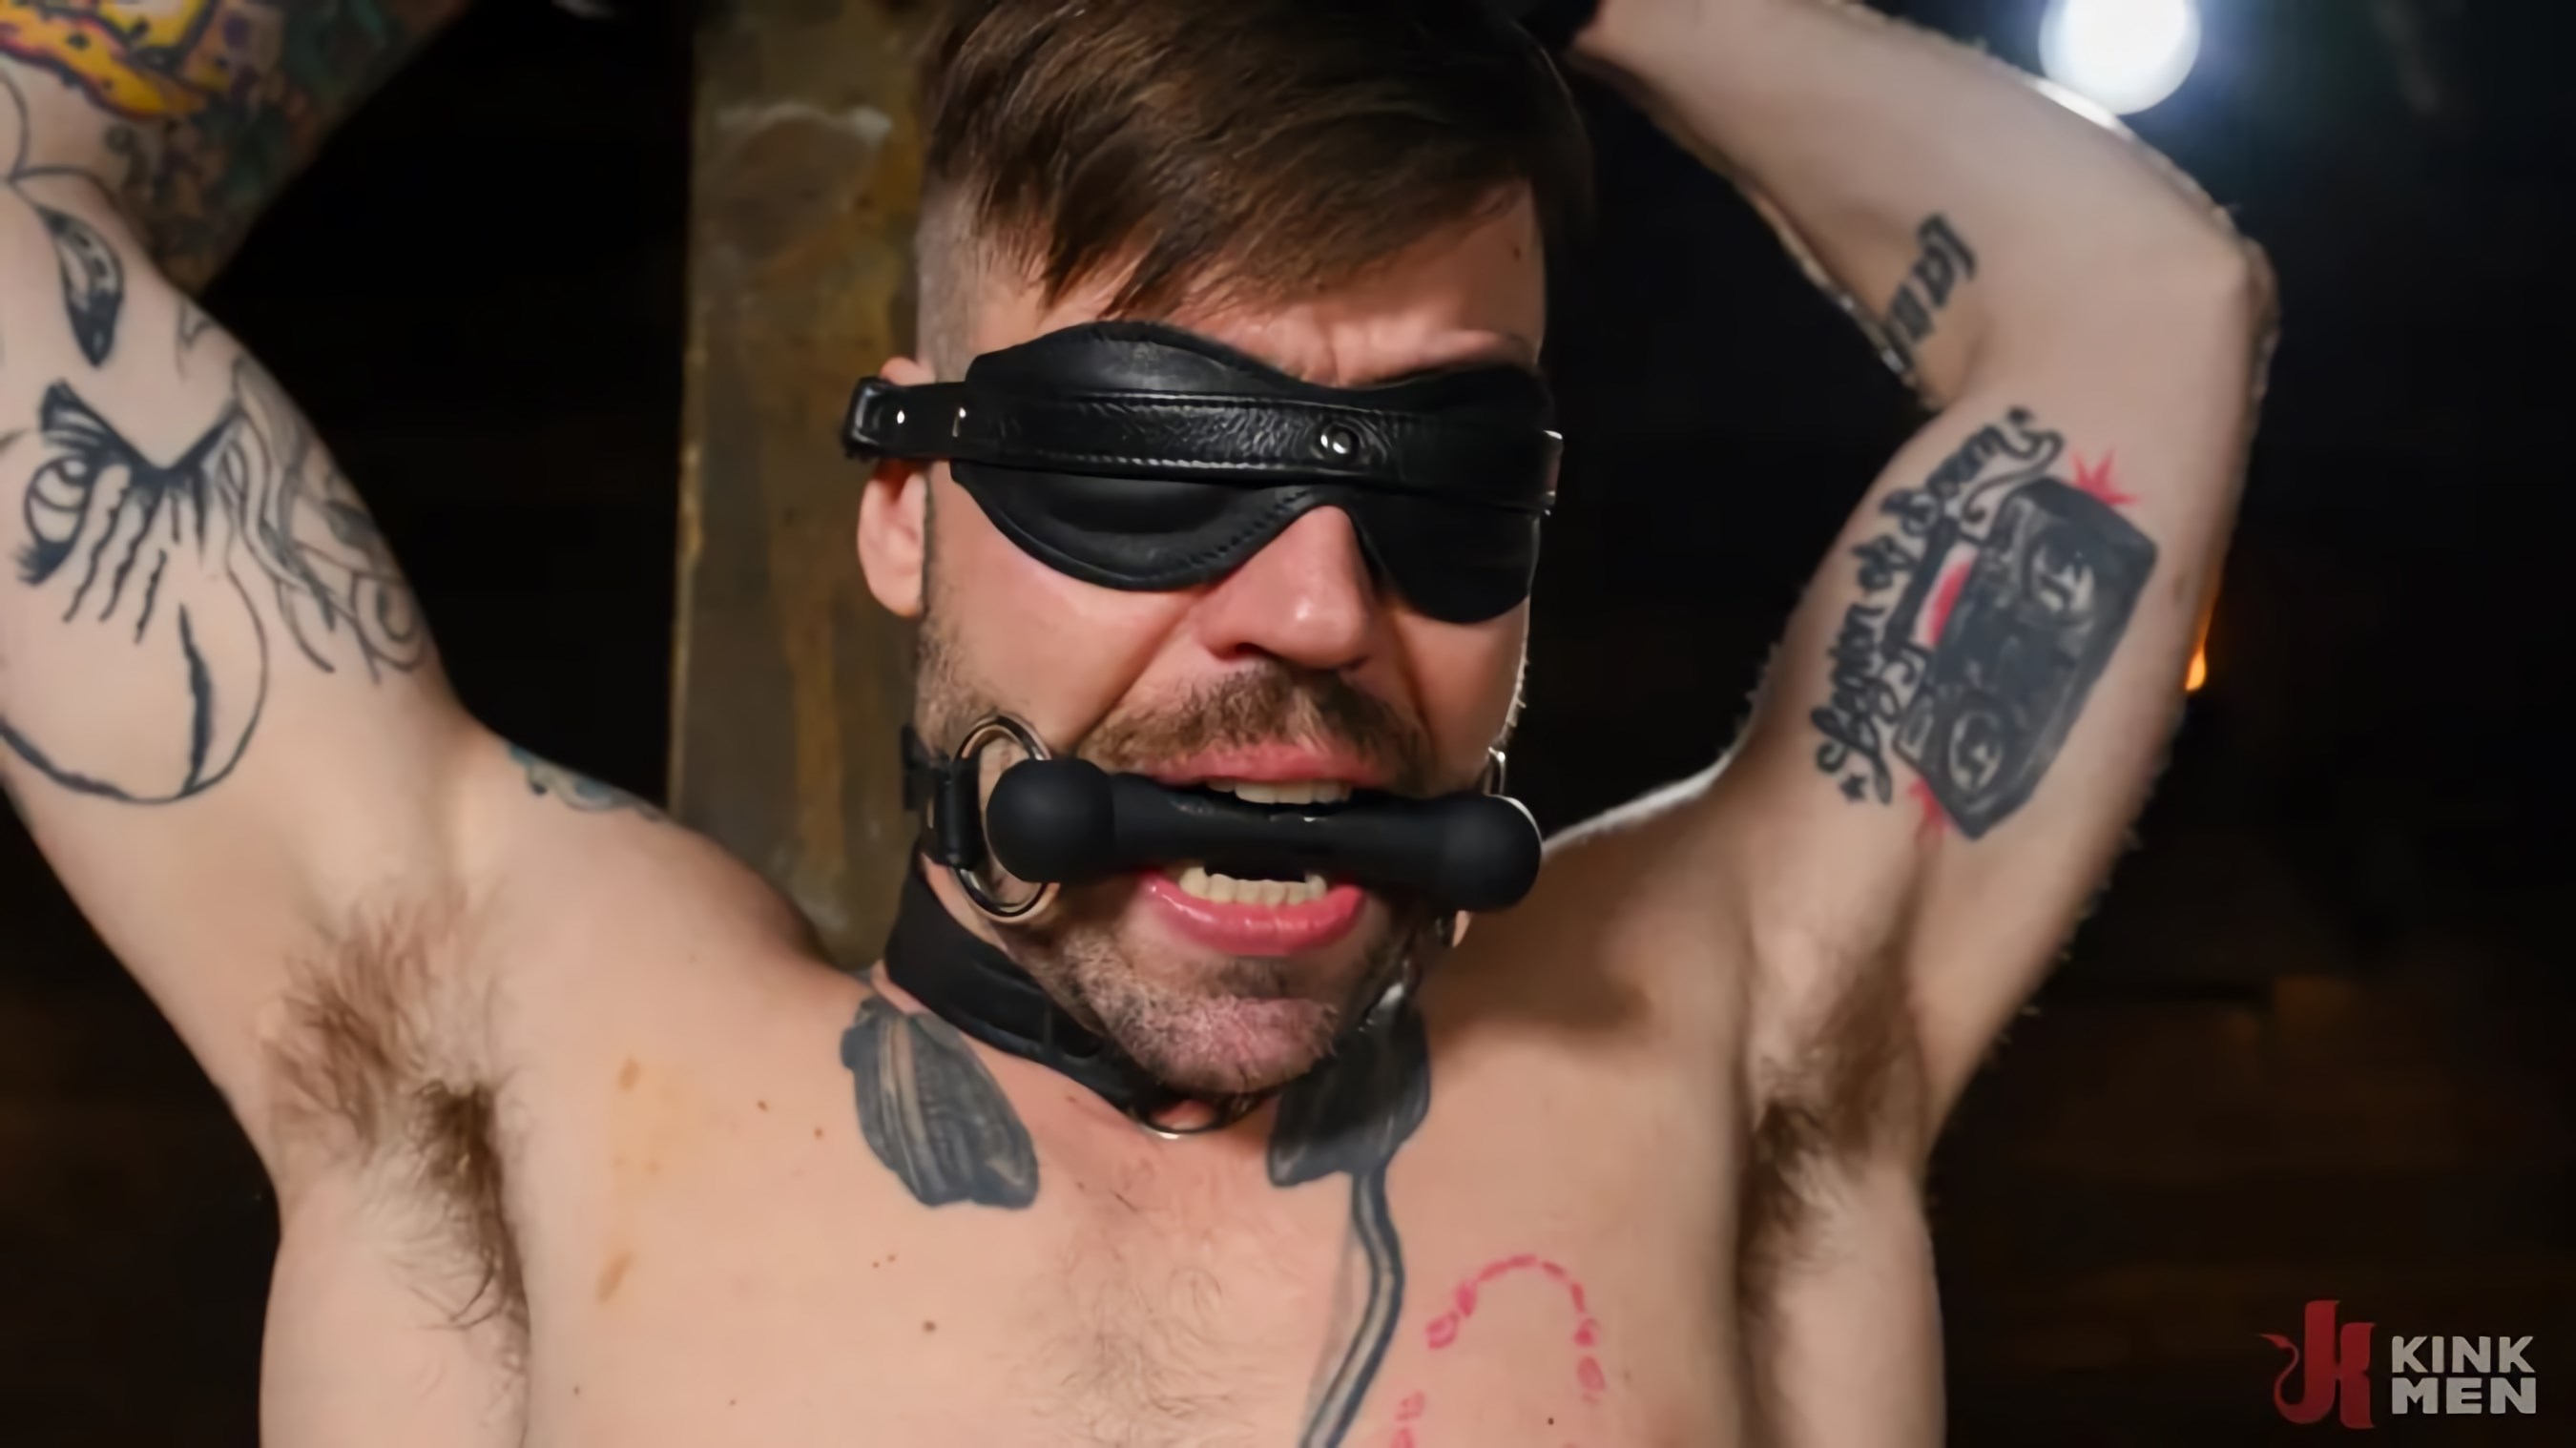 Kink Men 'TURTLE BOY: Buck Richards is fucked, flogged and bound in a metal cage and renamed Turtle Boy by Vander Pulaski' starring Vander Pulaski (Photo 11)